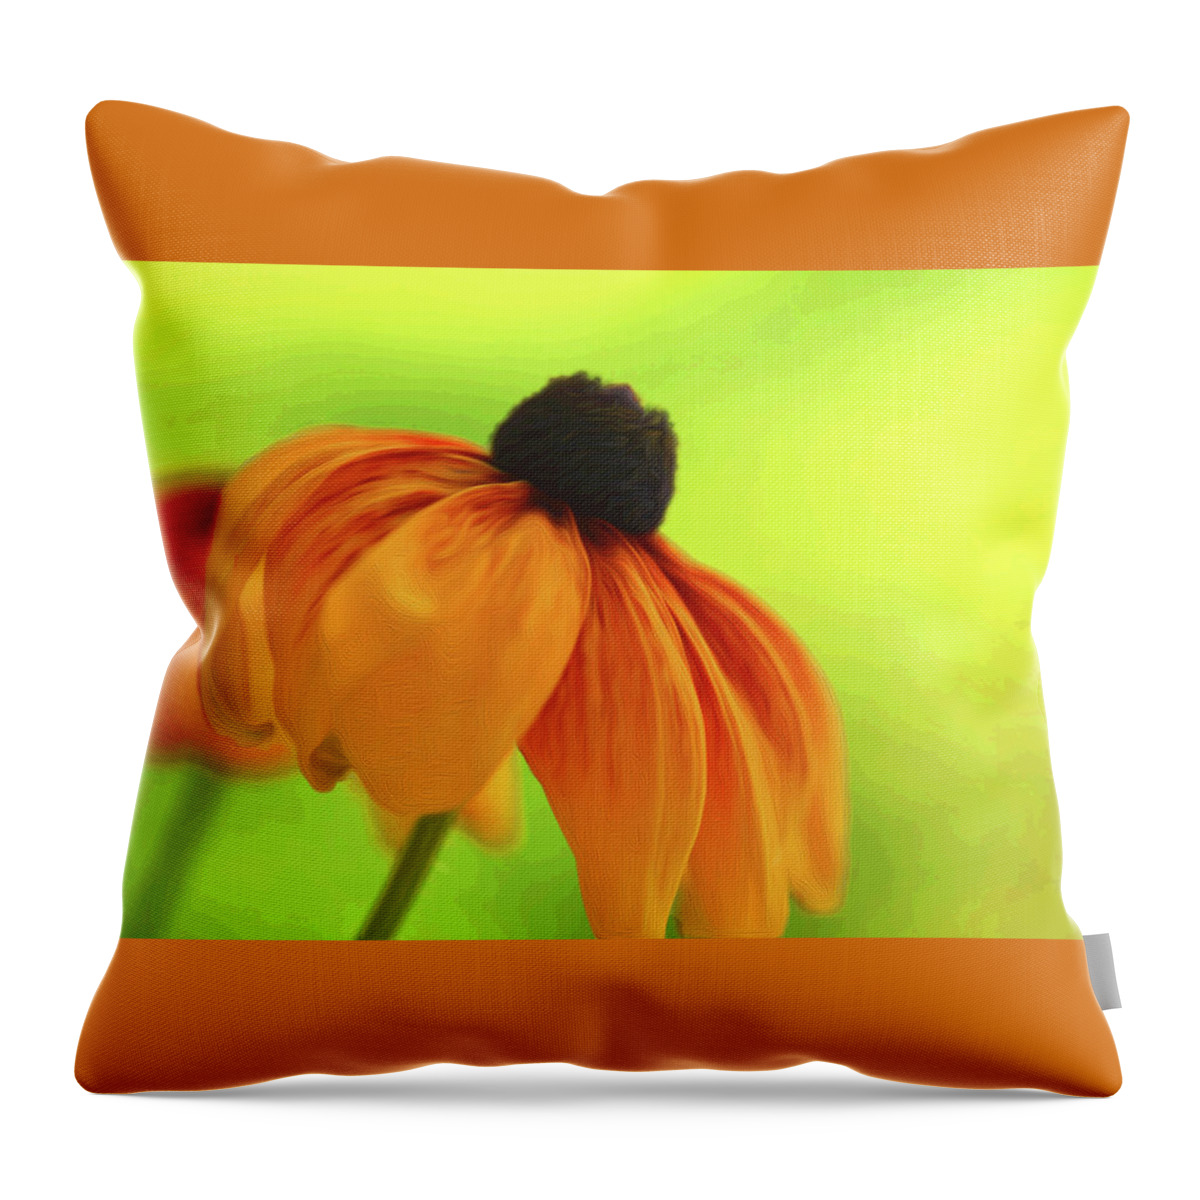 Daisy Throw Pillow featuring the photograph African Daisy by Kathy Paynter